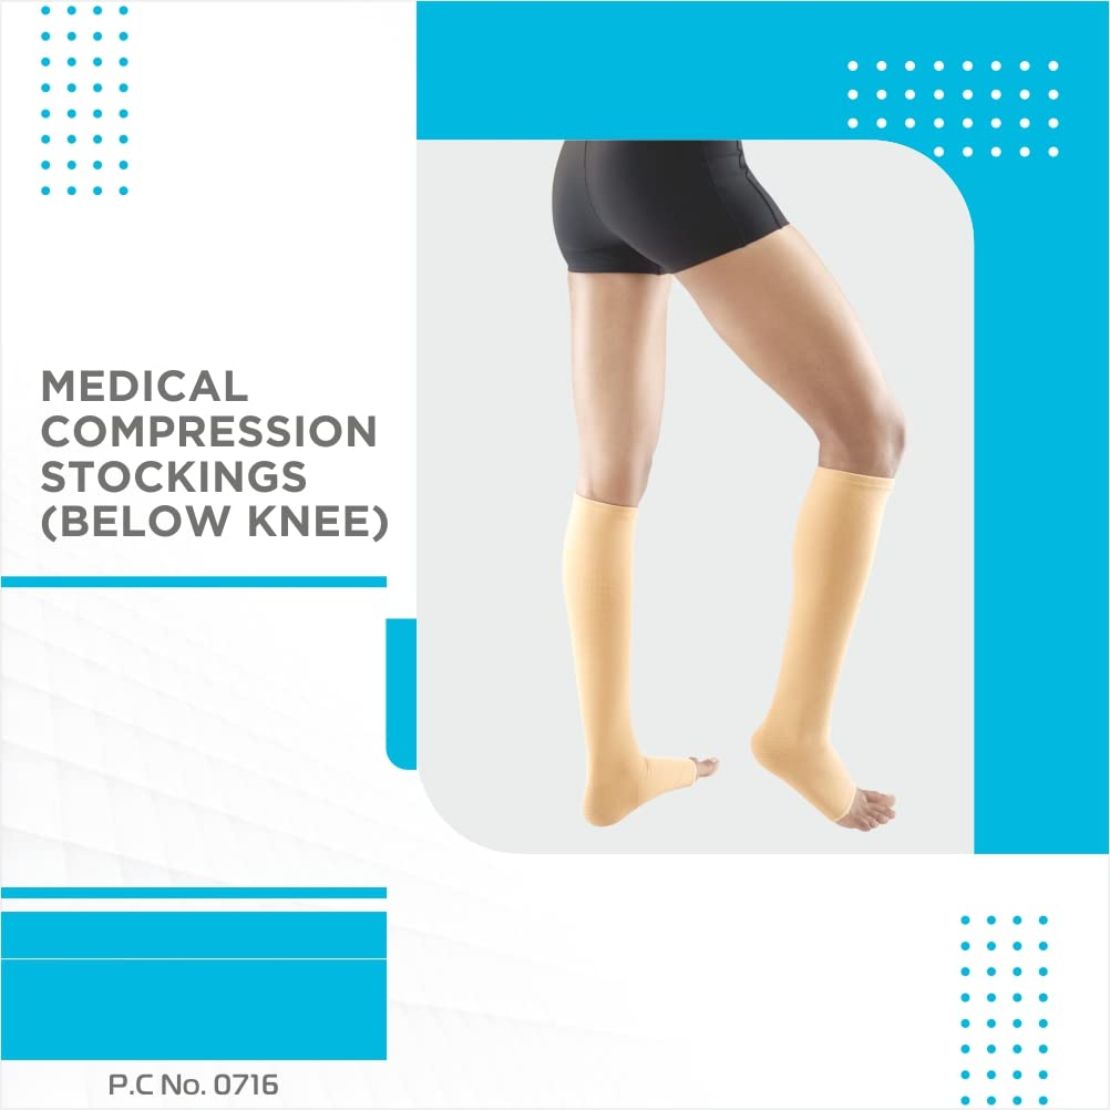 Buy Vissco Medical Compression Stockings are specialized socks that apply gentle pressure to your legs and ankles. They can help improve blood flow from your legs to your heart.